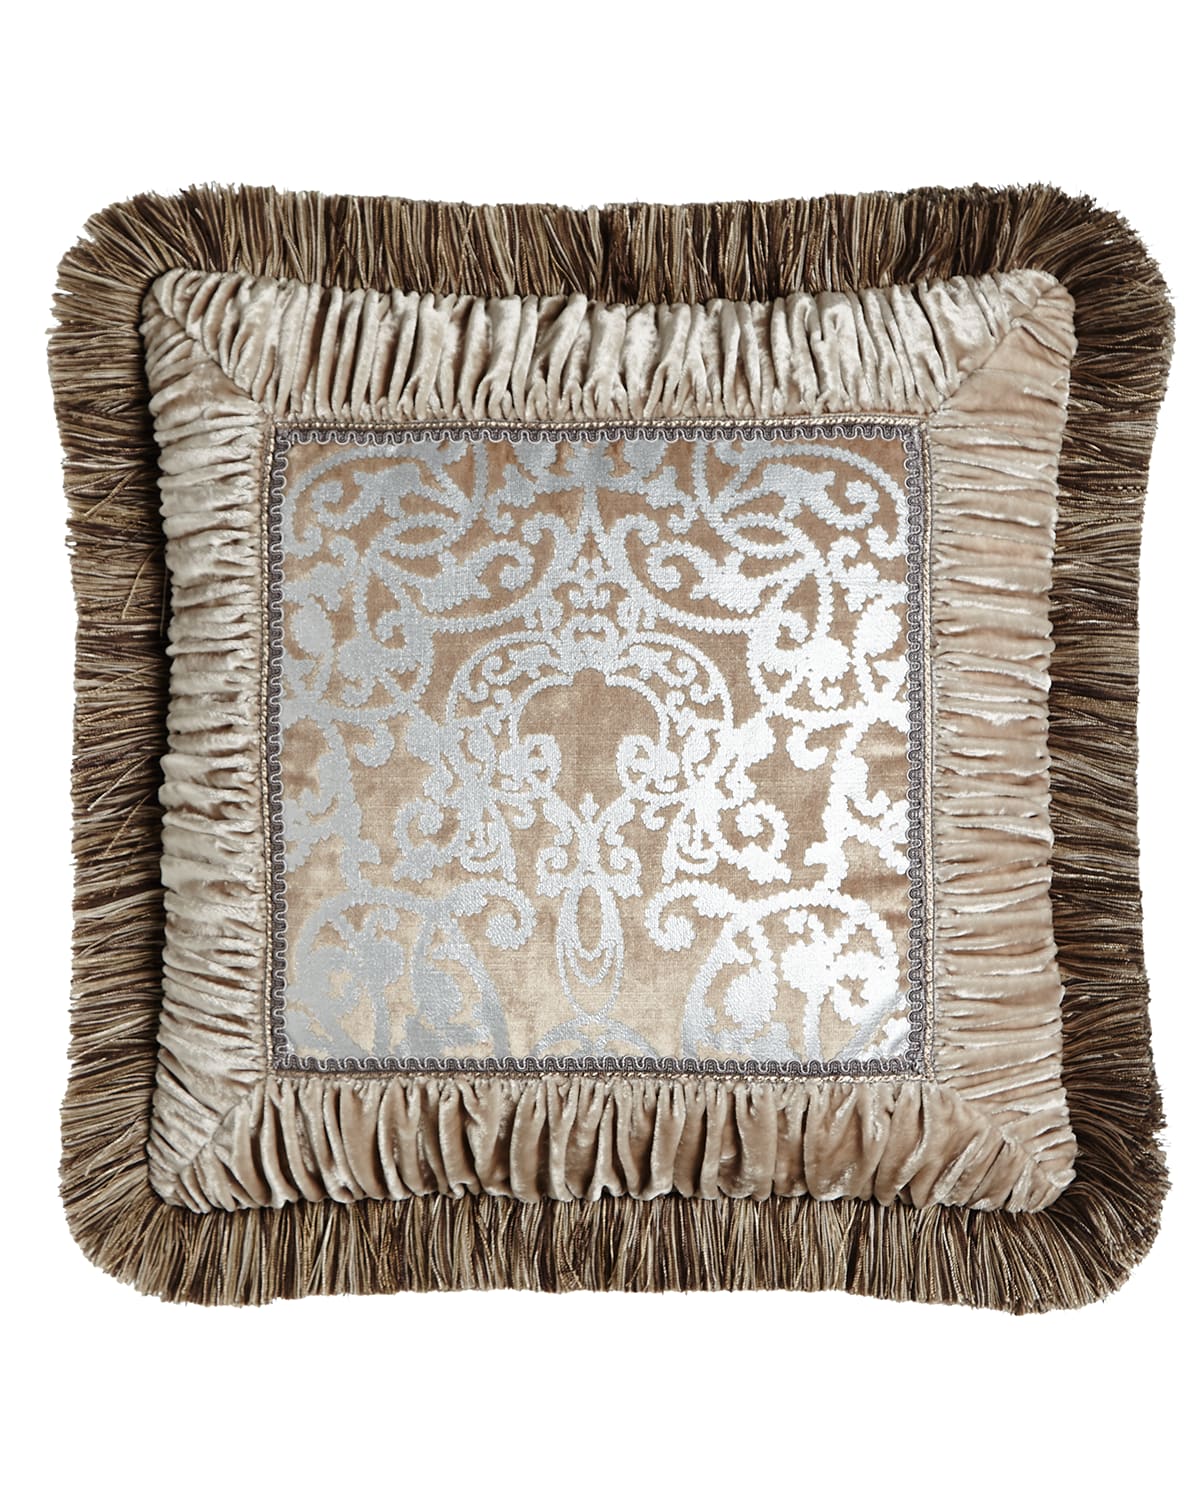 Image Dian Austin Couture Home Gretta Pillow with Scroll Center, 18"Sq.